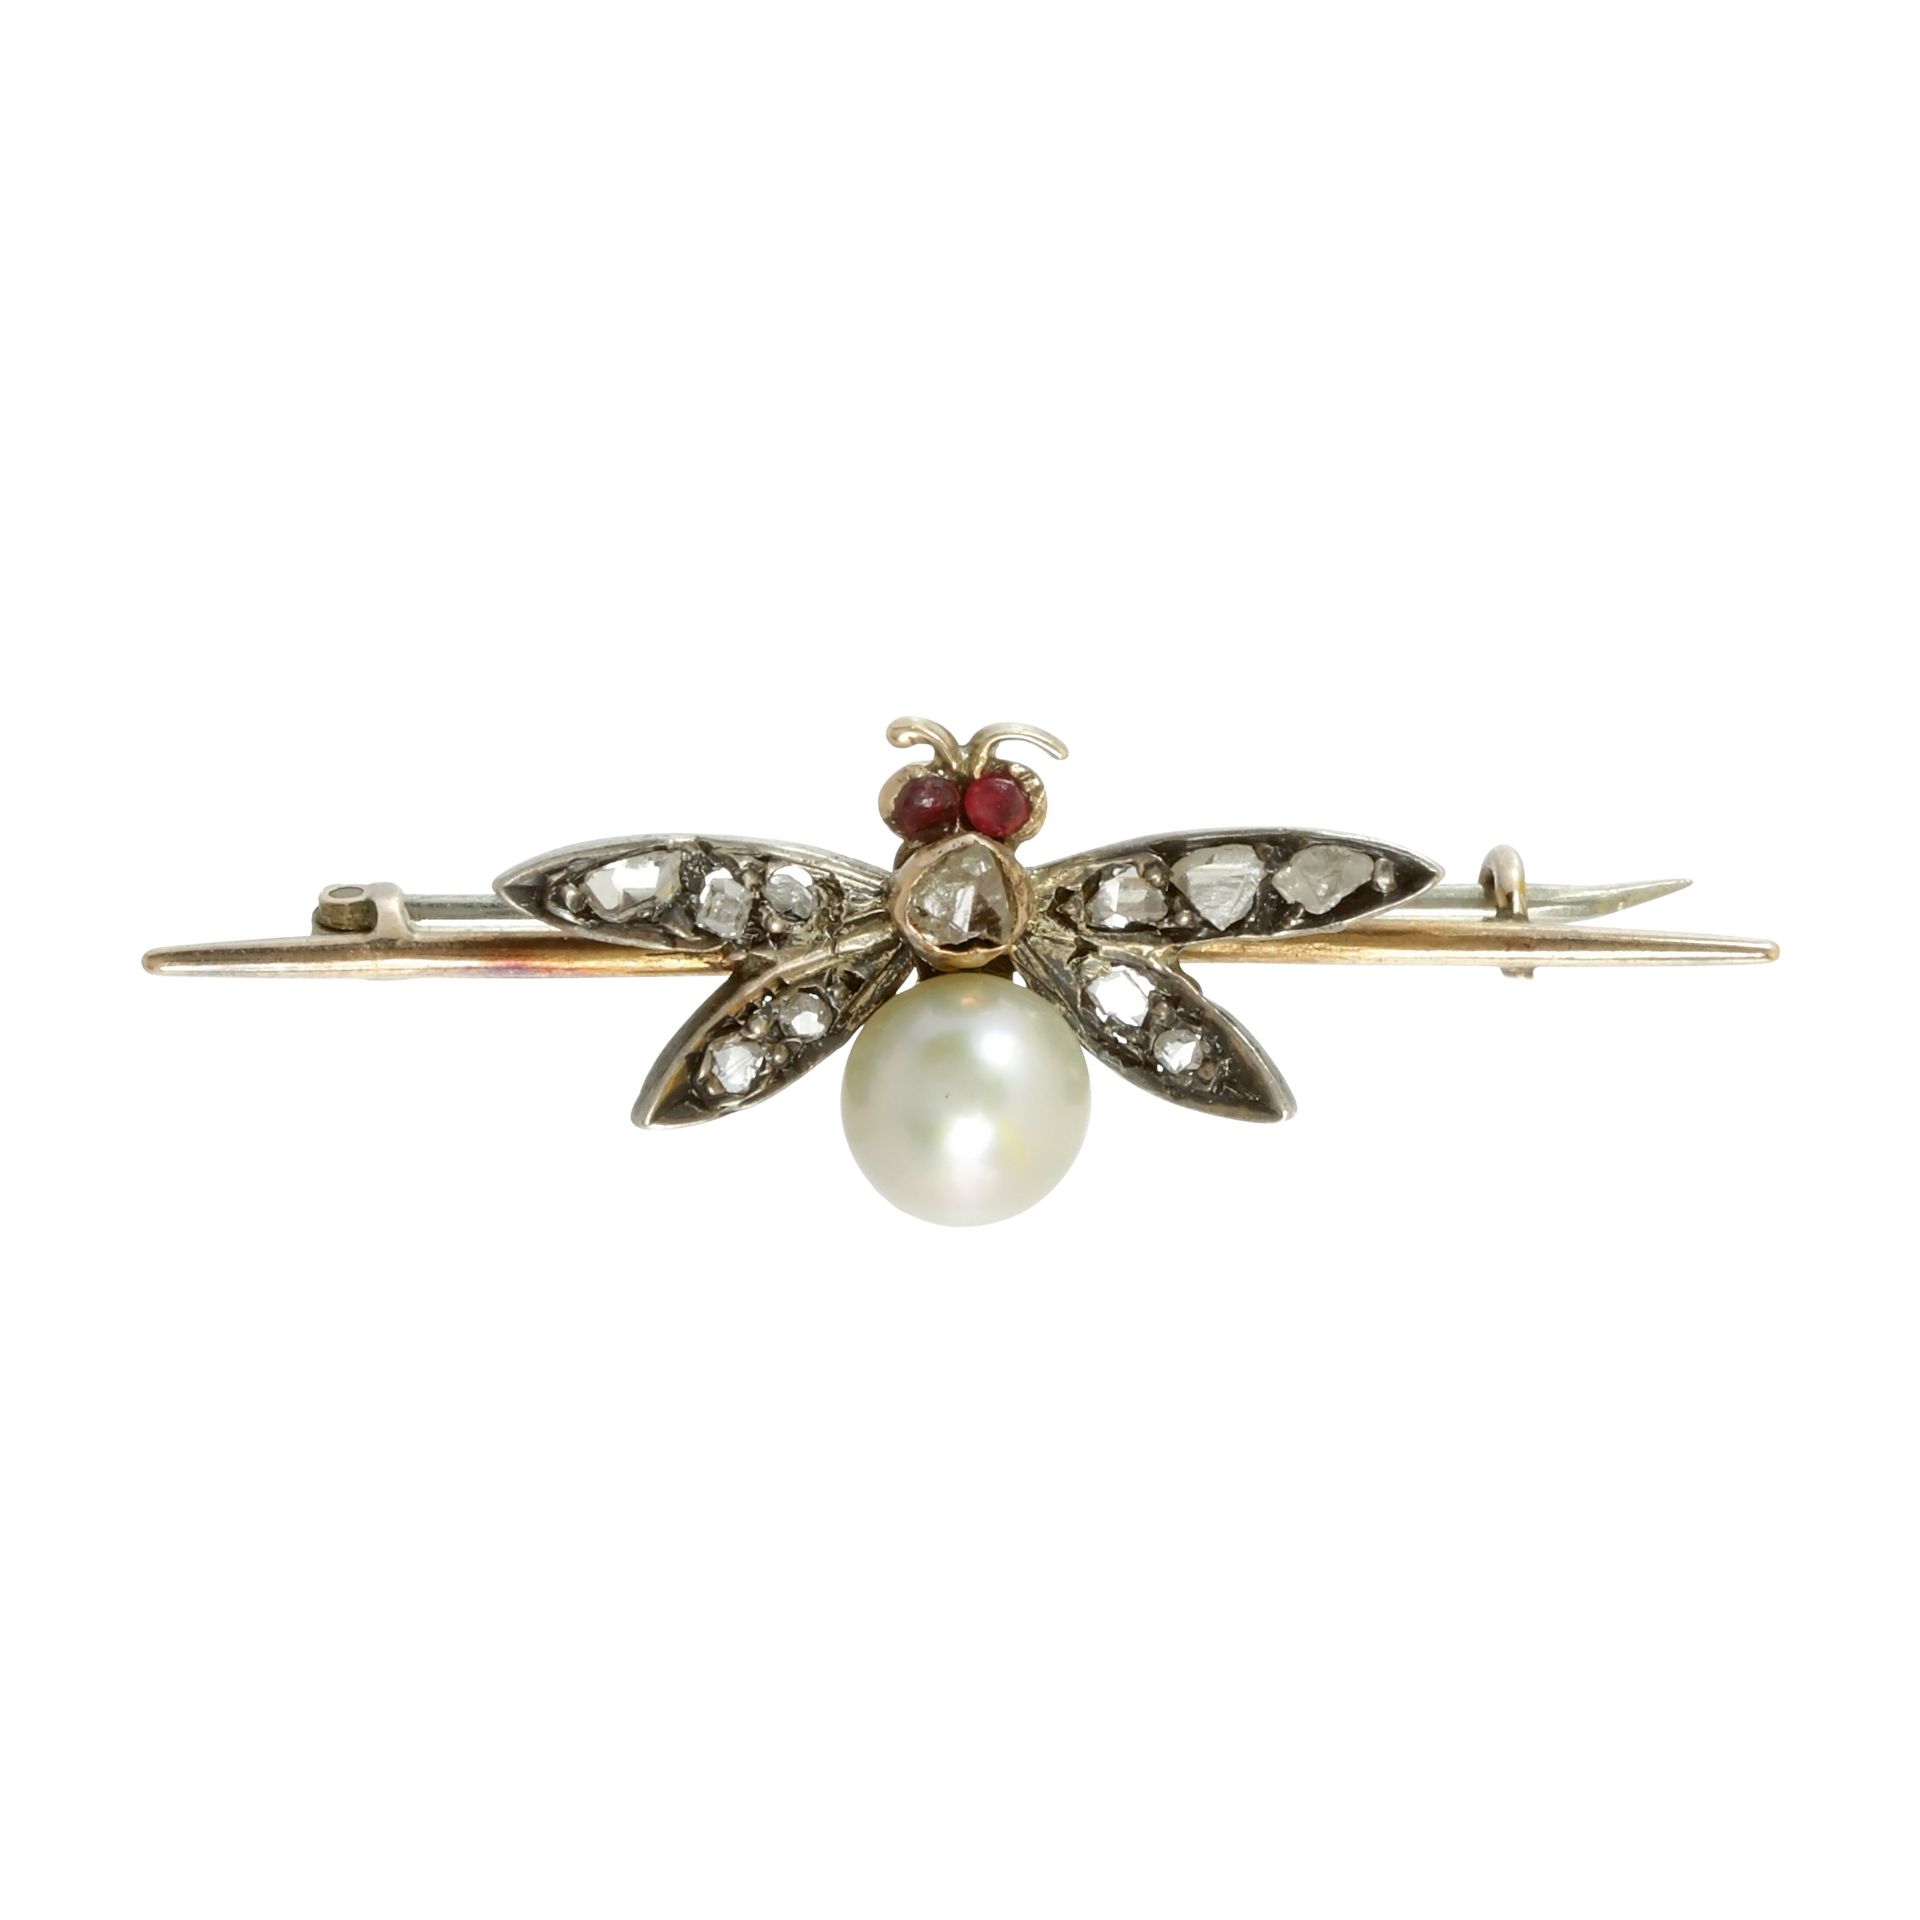 A RUBY, DIAMOND AND PEARL INSECT BROOCH in high carat yellow gold, designed as am insect, its body